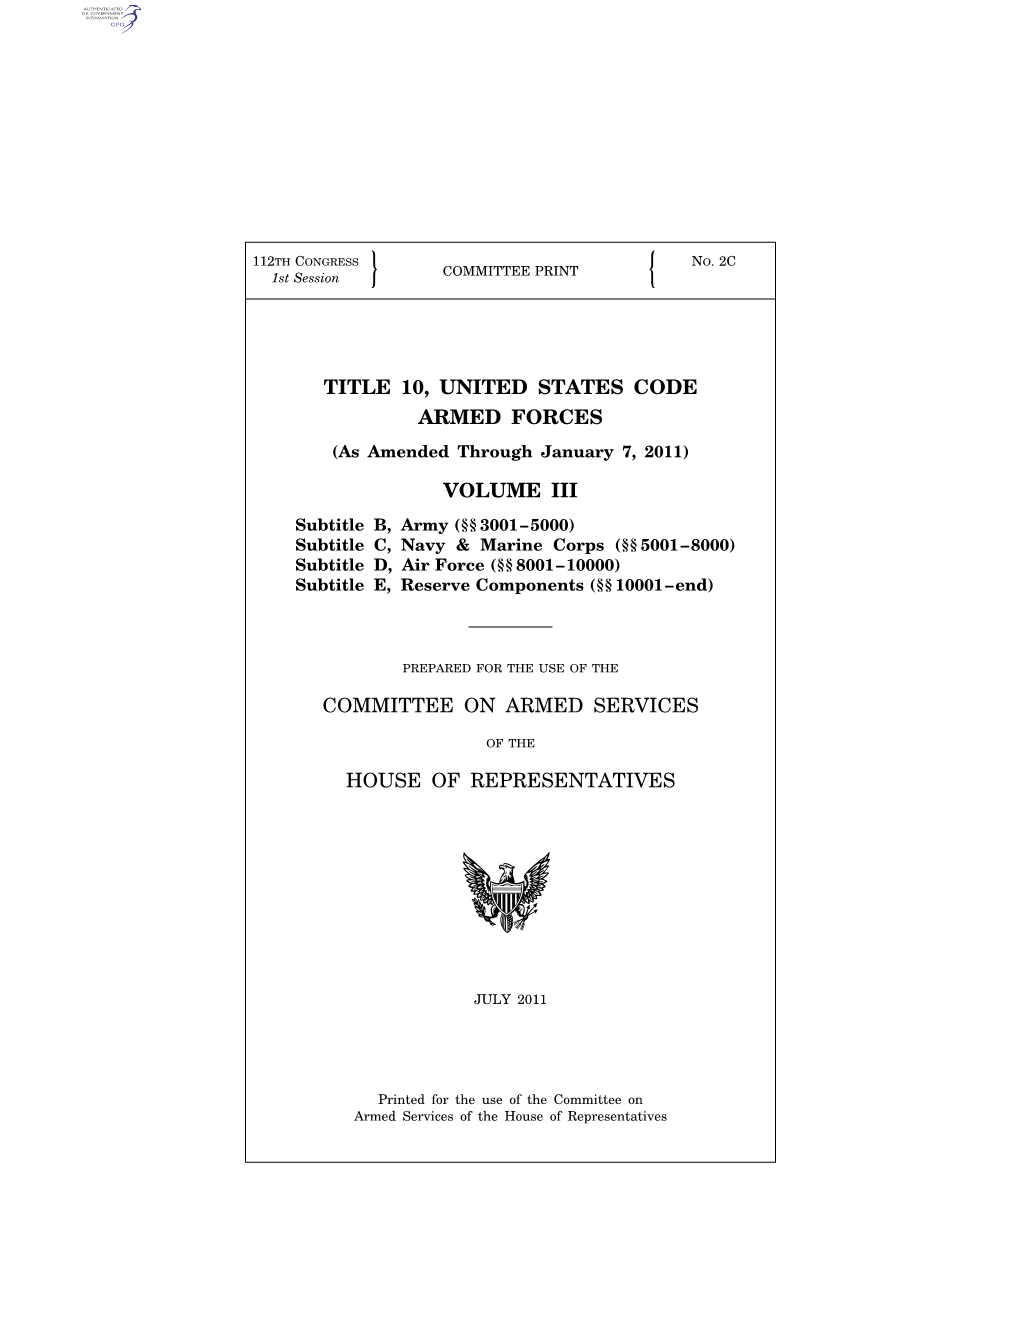 Title 10, United States Code Armed Forces Volume Iii